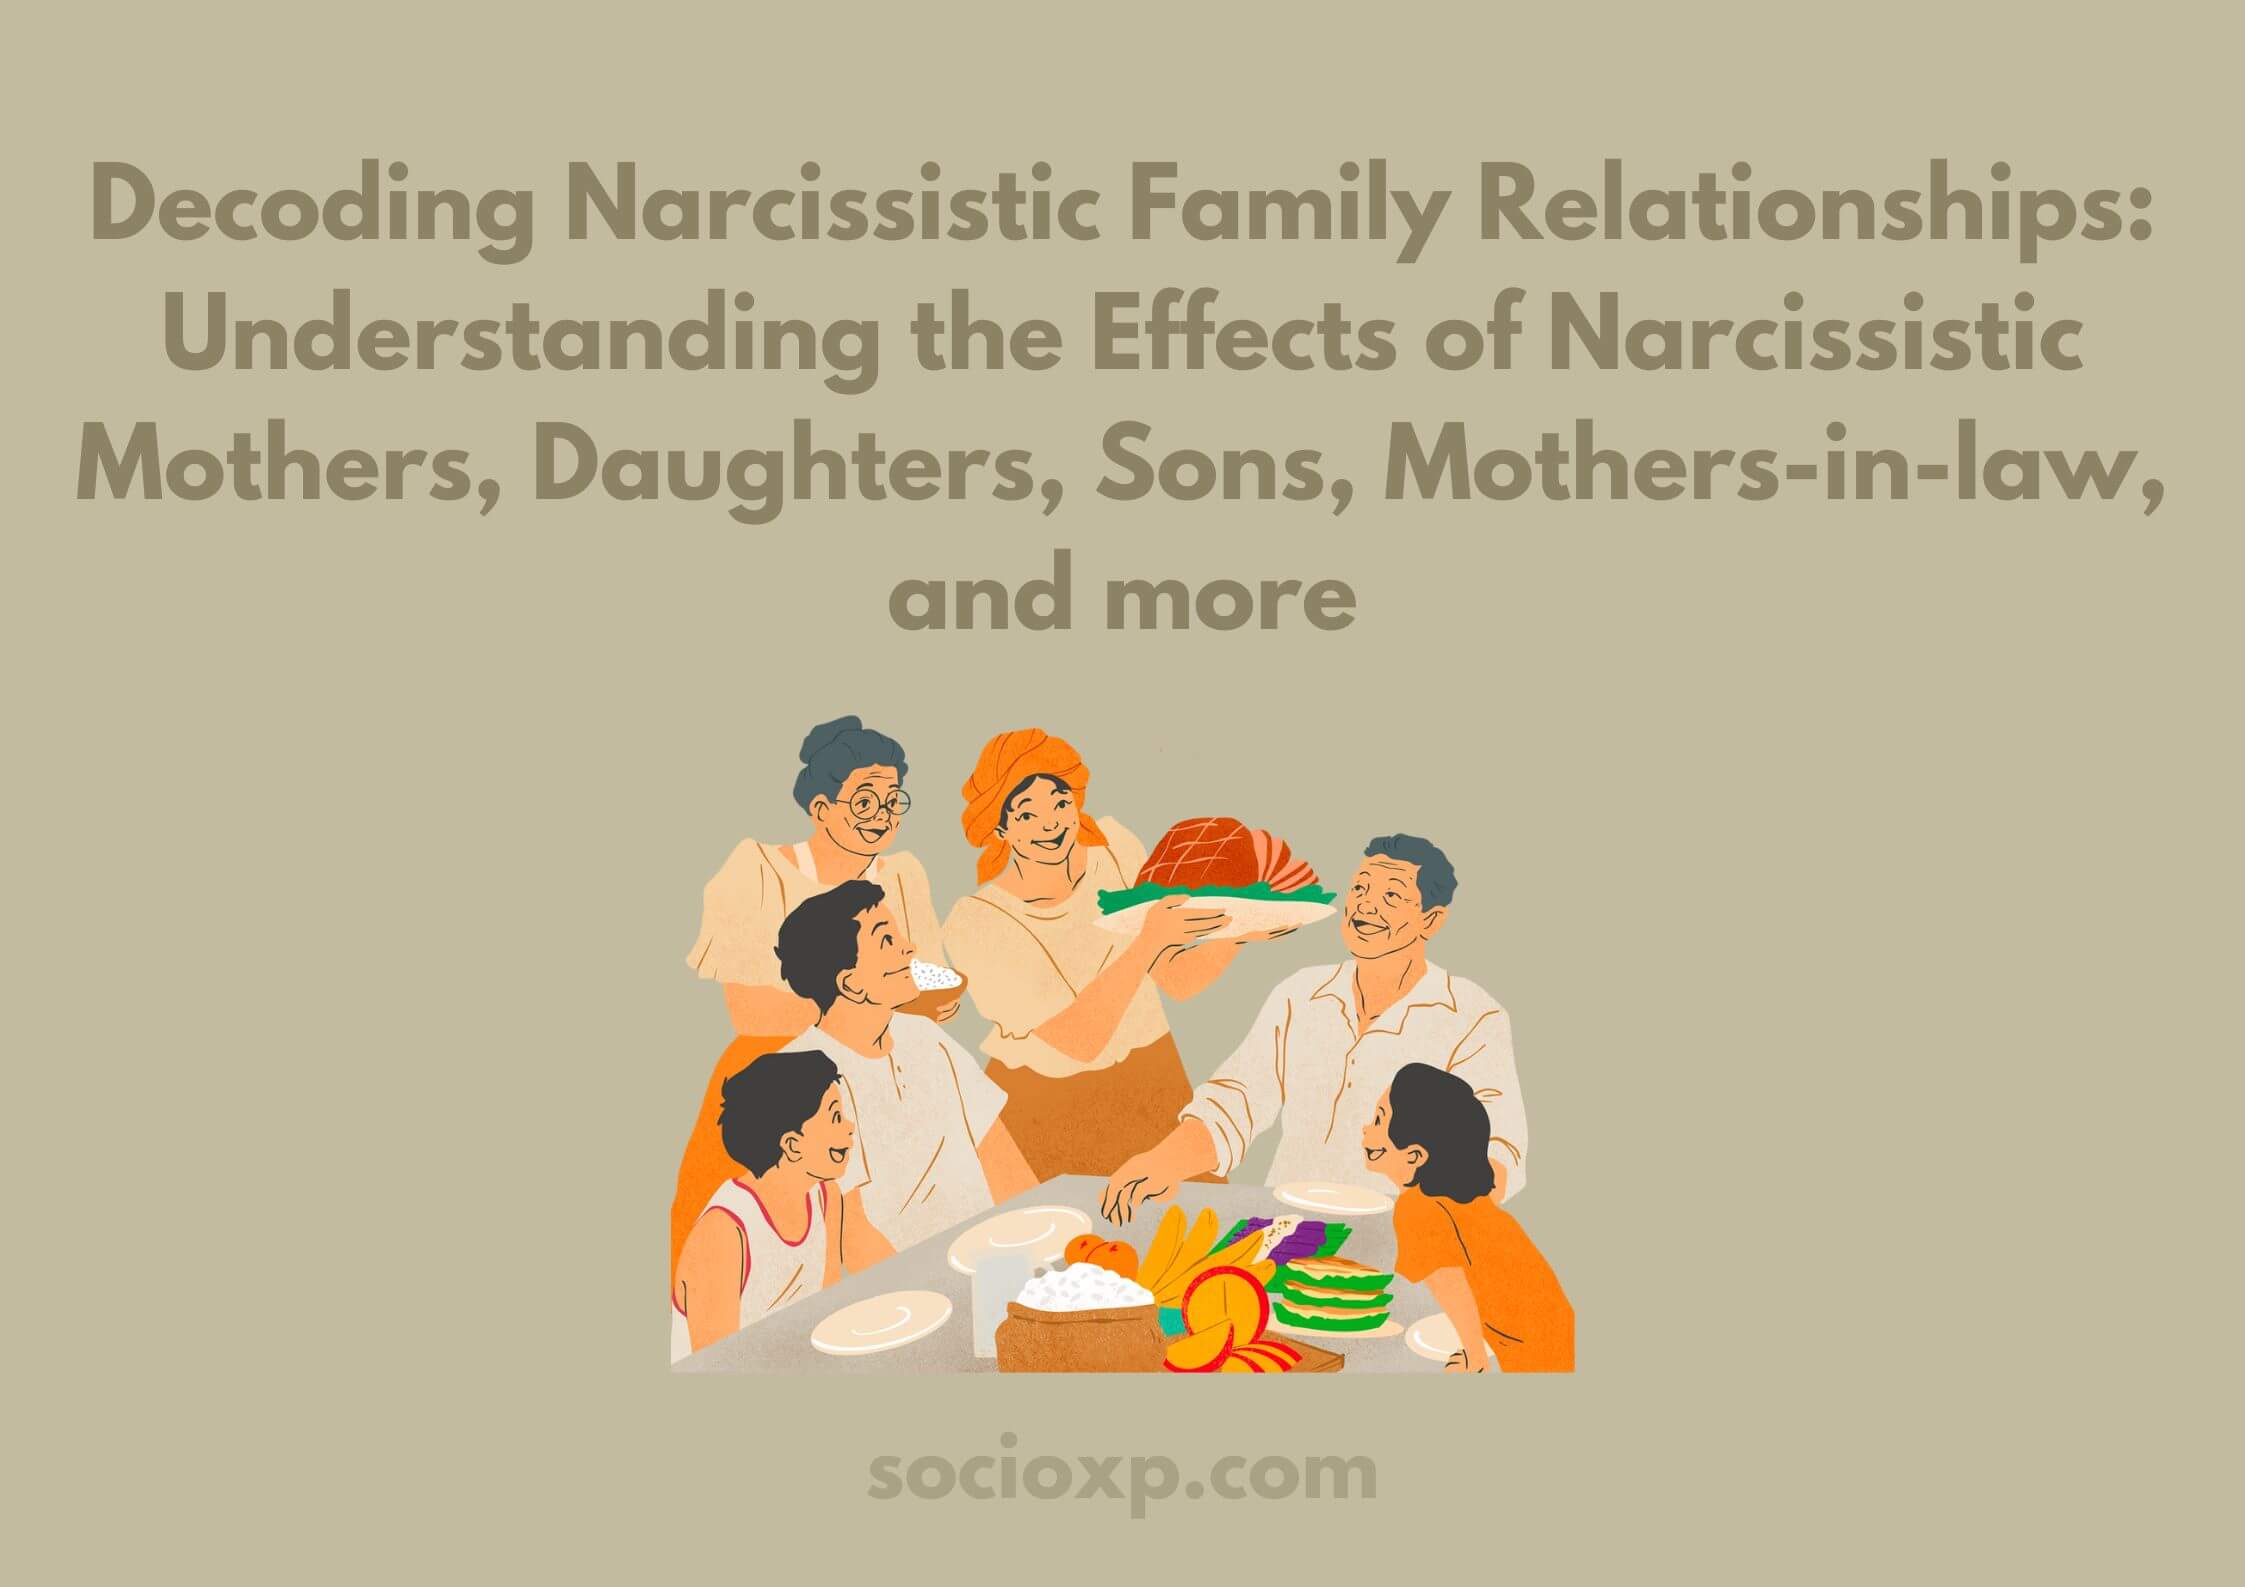 Decoding Narcissistic Family Relationships: Understanding the Effects of Narcissistic Mothers, Daughters, Sons, Mothers-in-law, and more